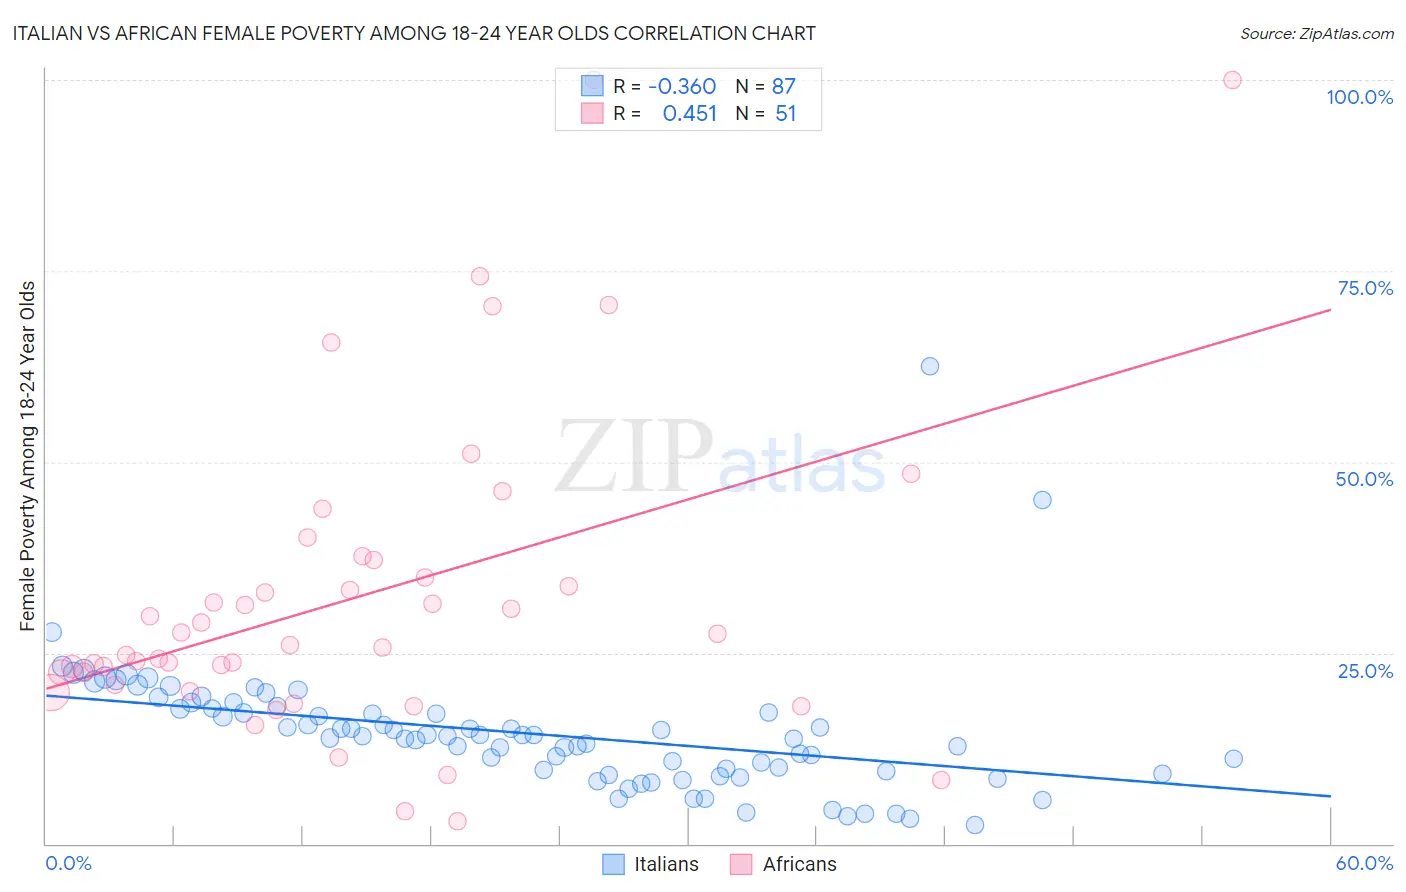 Italian vs African Female Poverty Among 18-24 Year Olds